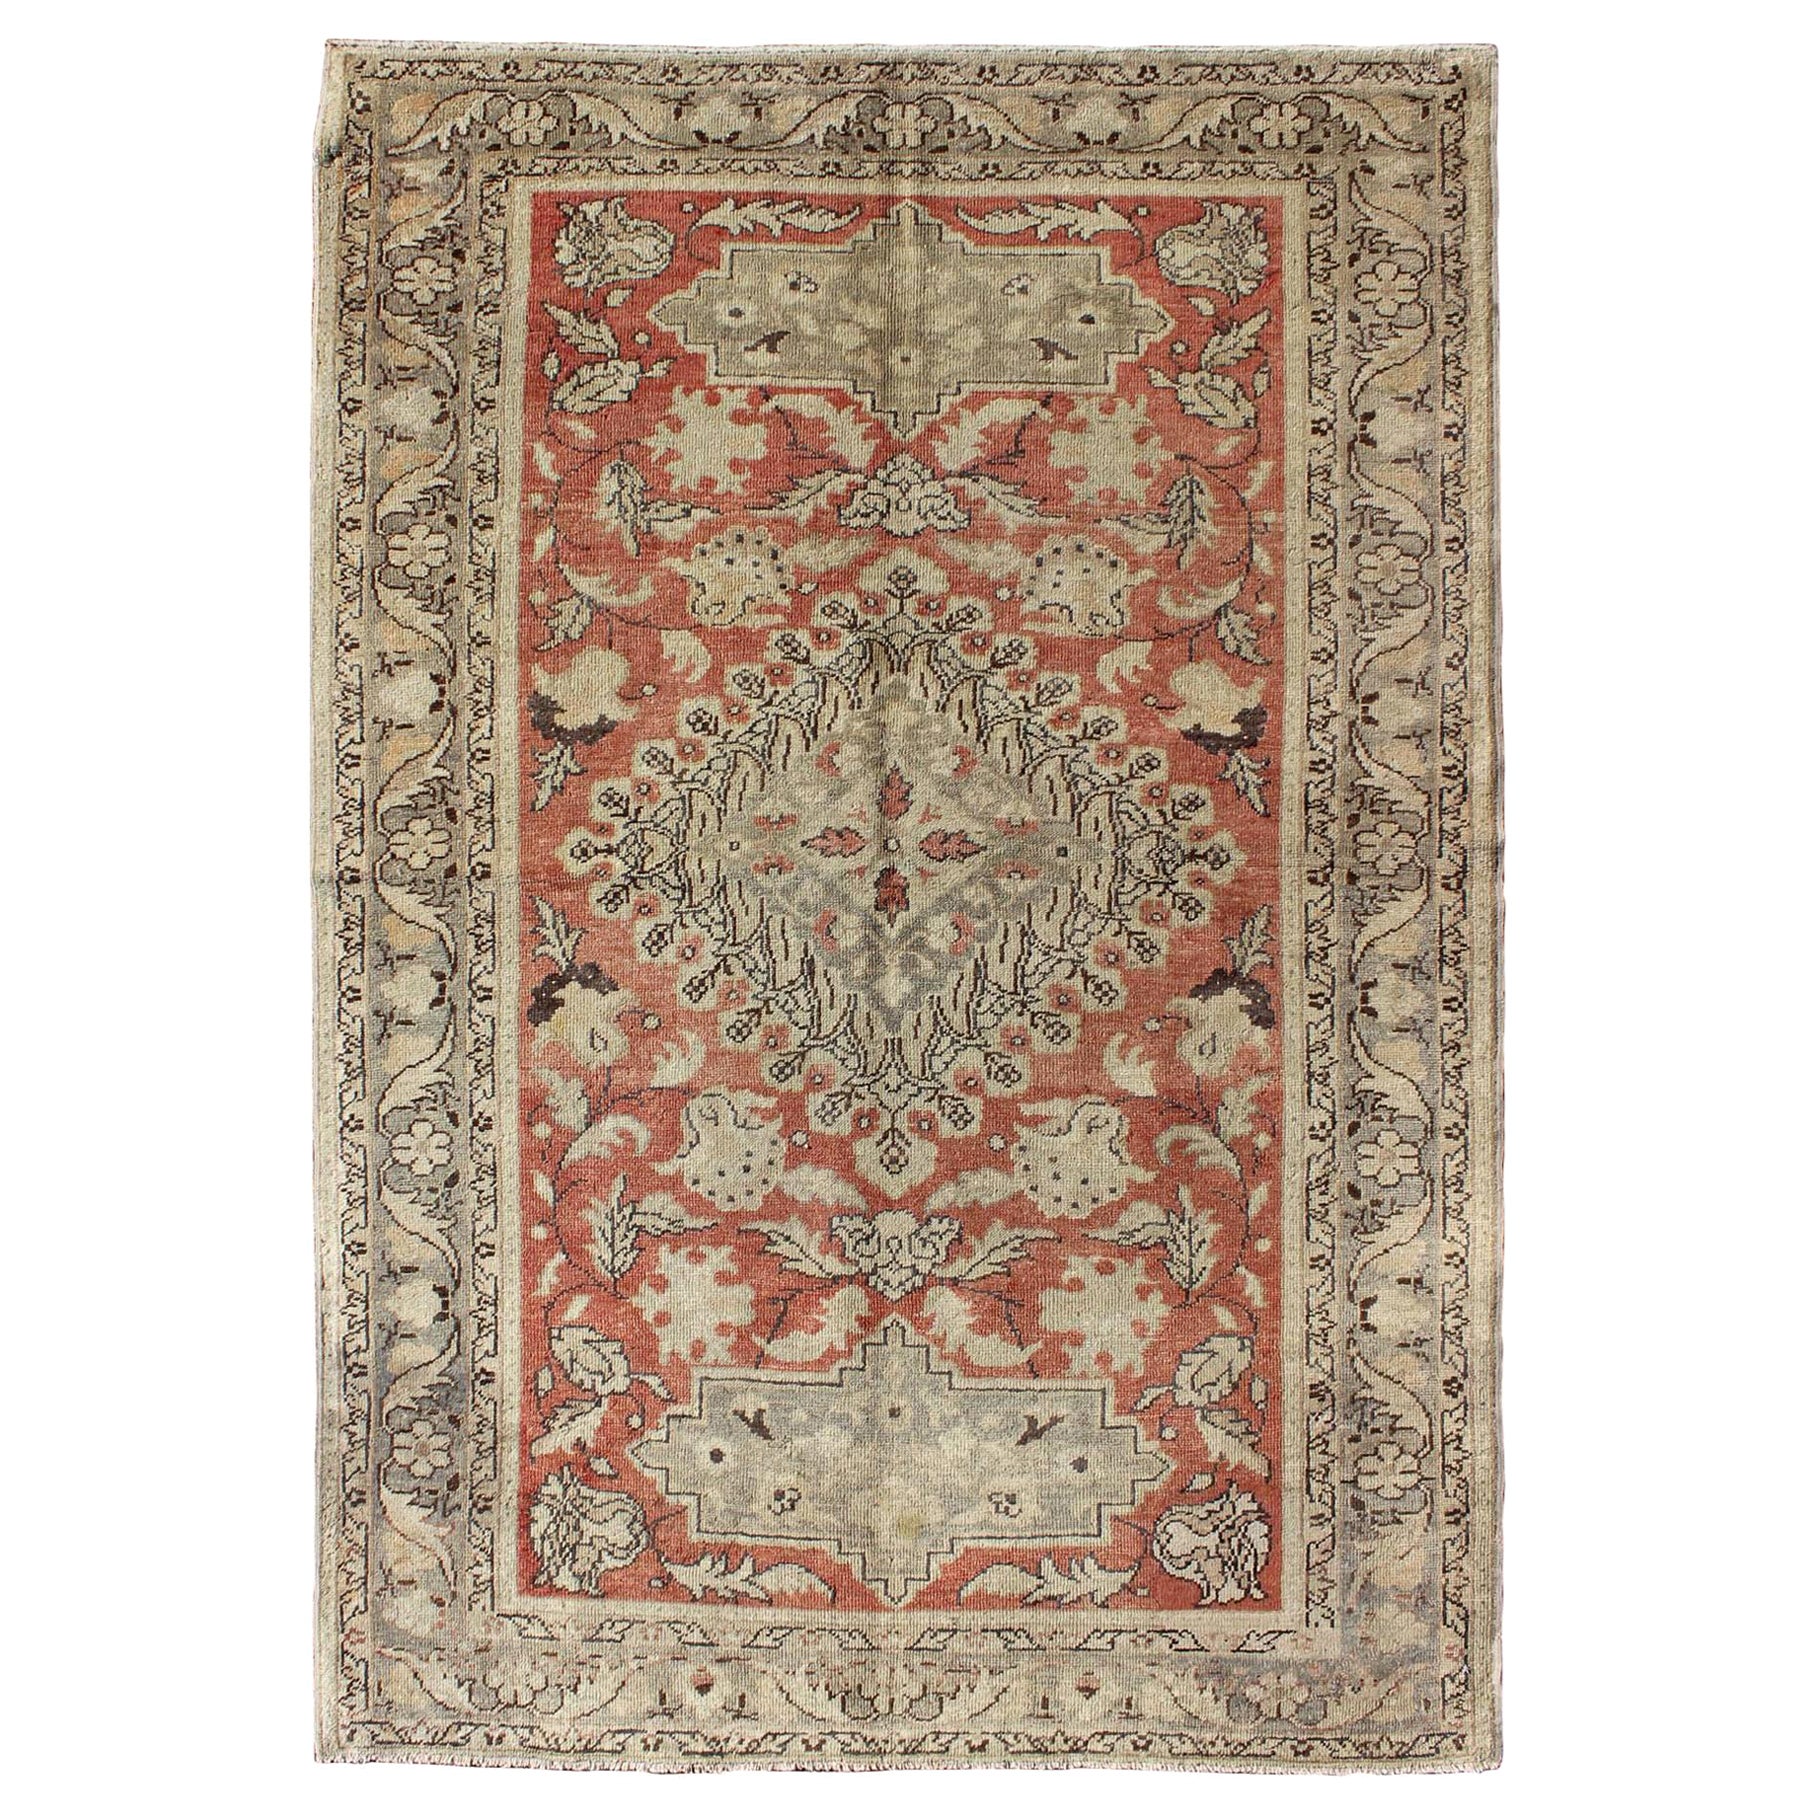 Antique Turkish Oushak Rug with Geometric Medallion and Floral Designs For Sale